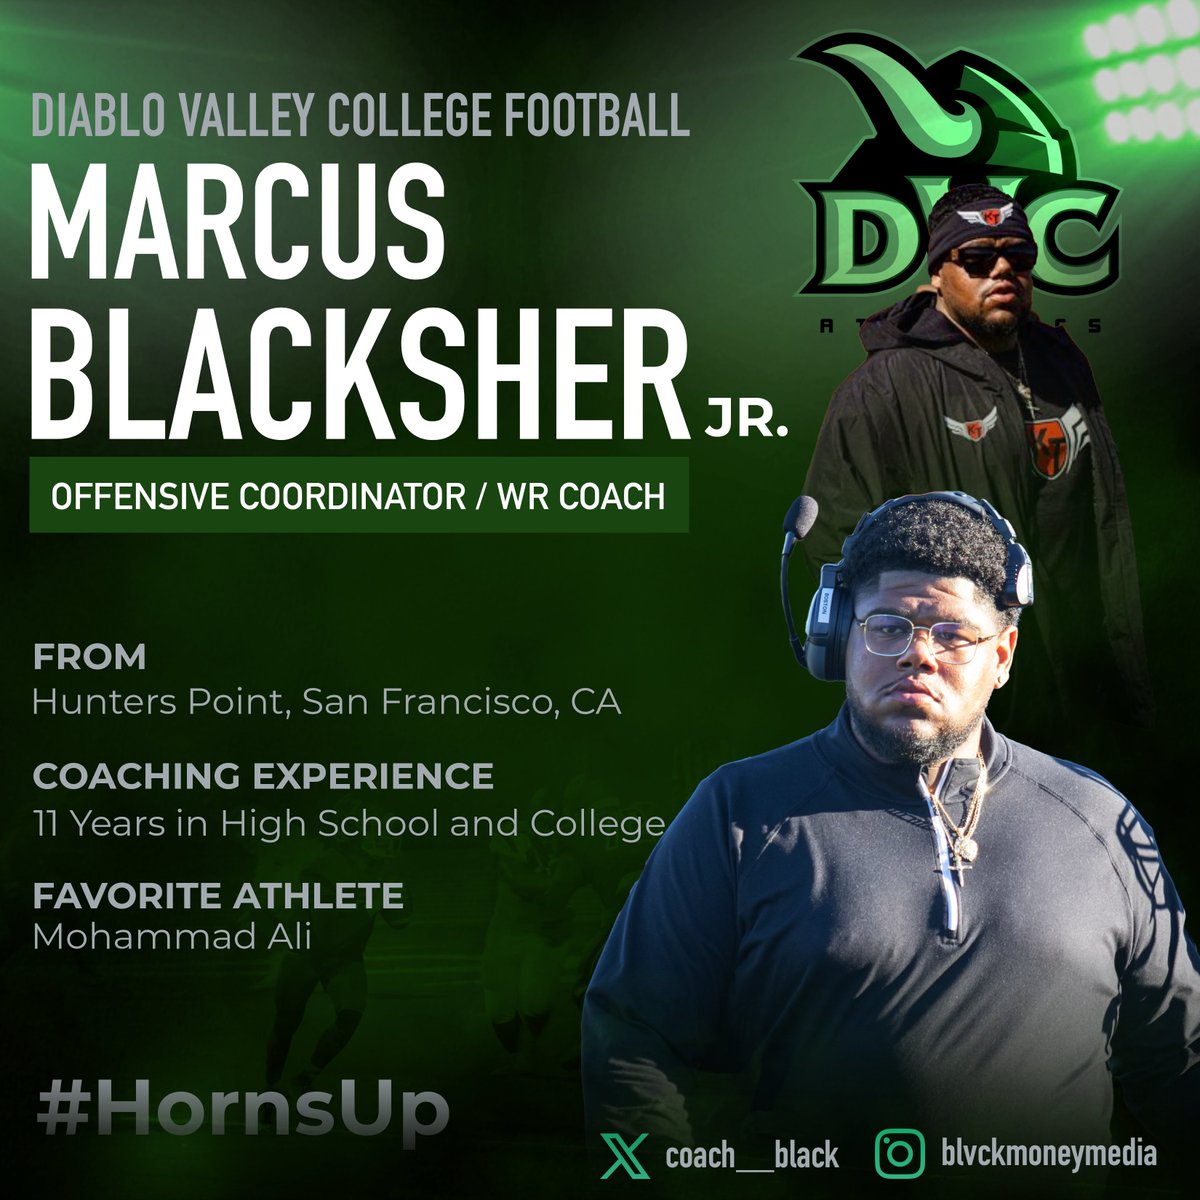 Marcus Blacksher Jr. (@coach__black) has been named the Offensive Coordinator / Wide Receivers Coach for your DVC Vikings. #HornsUp